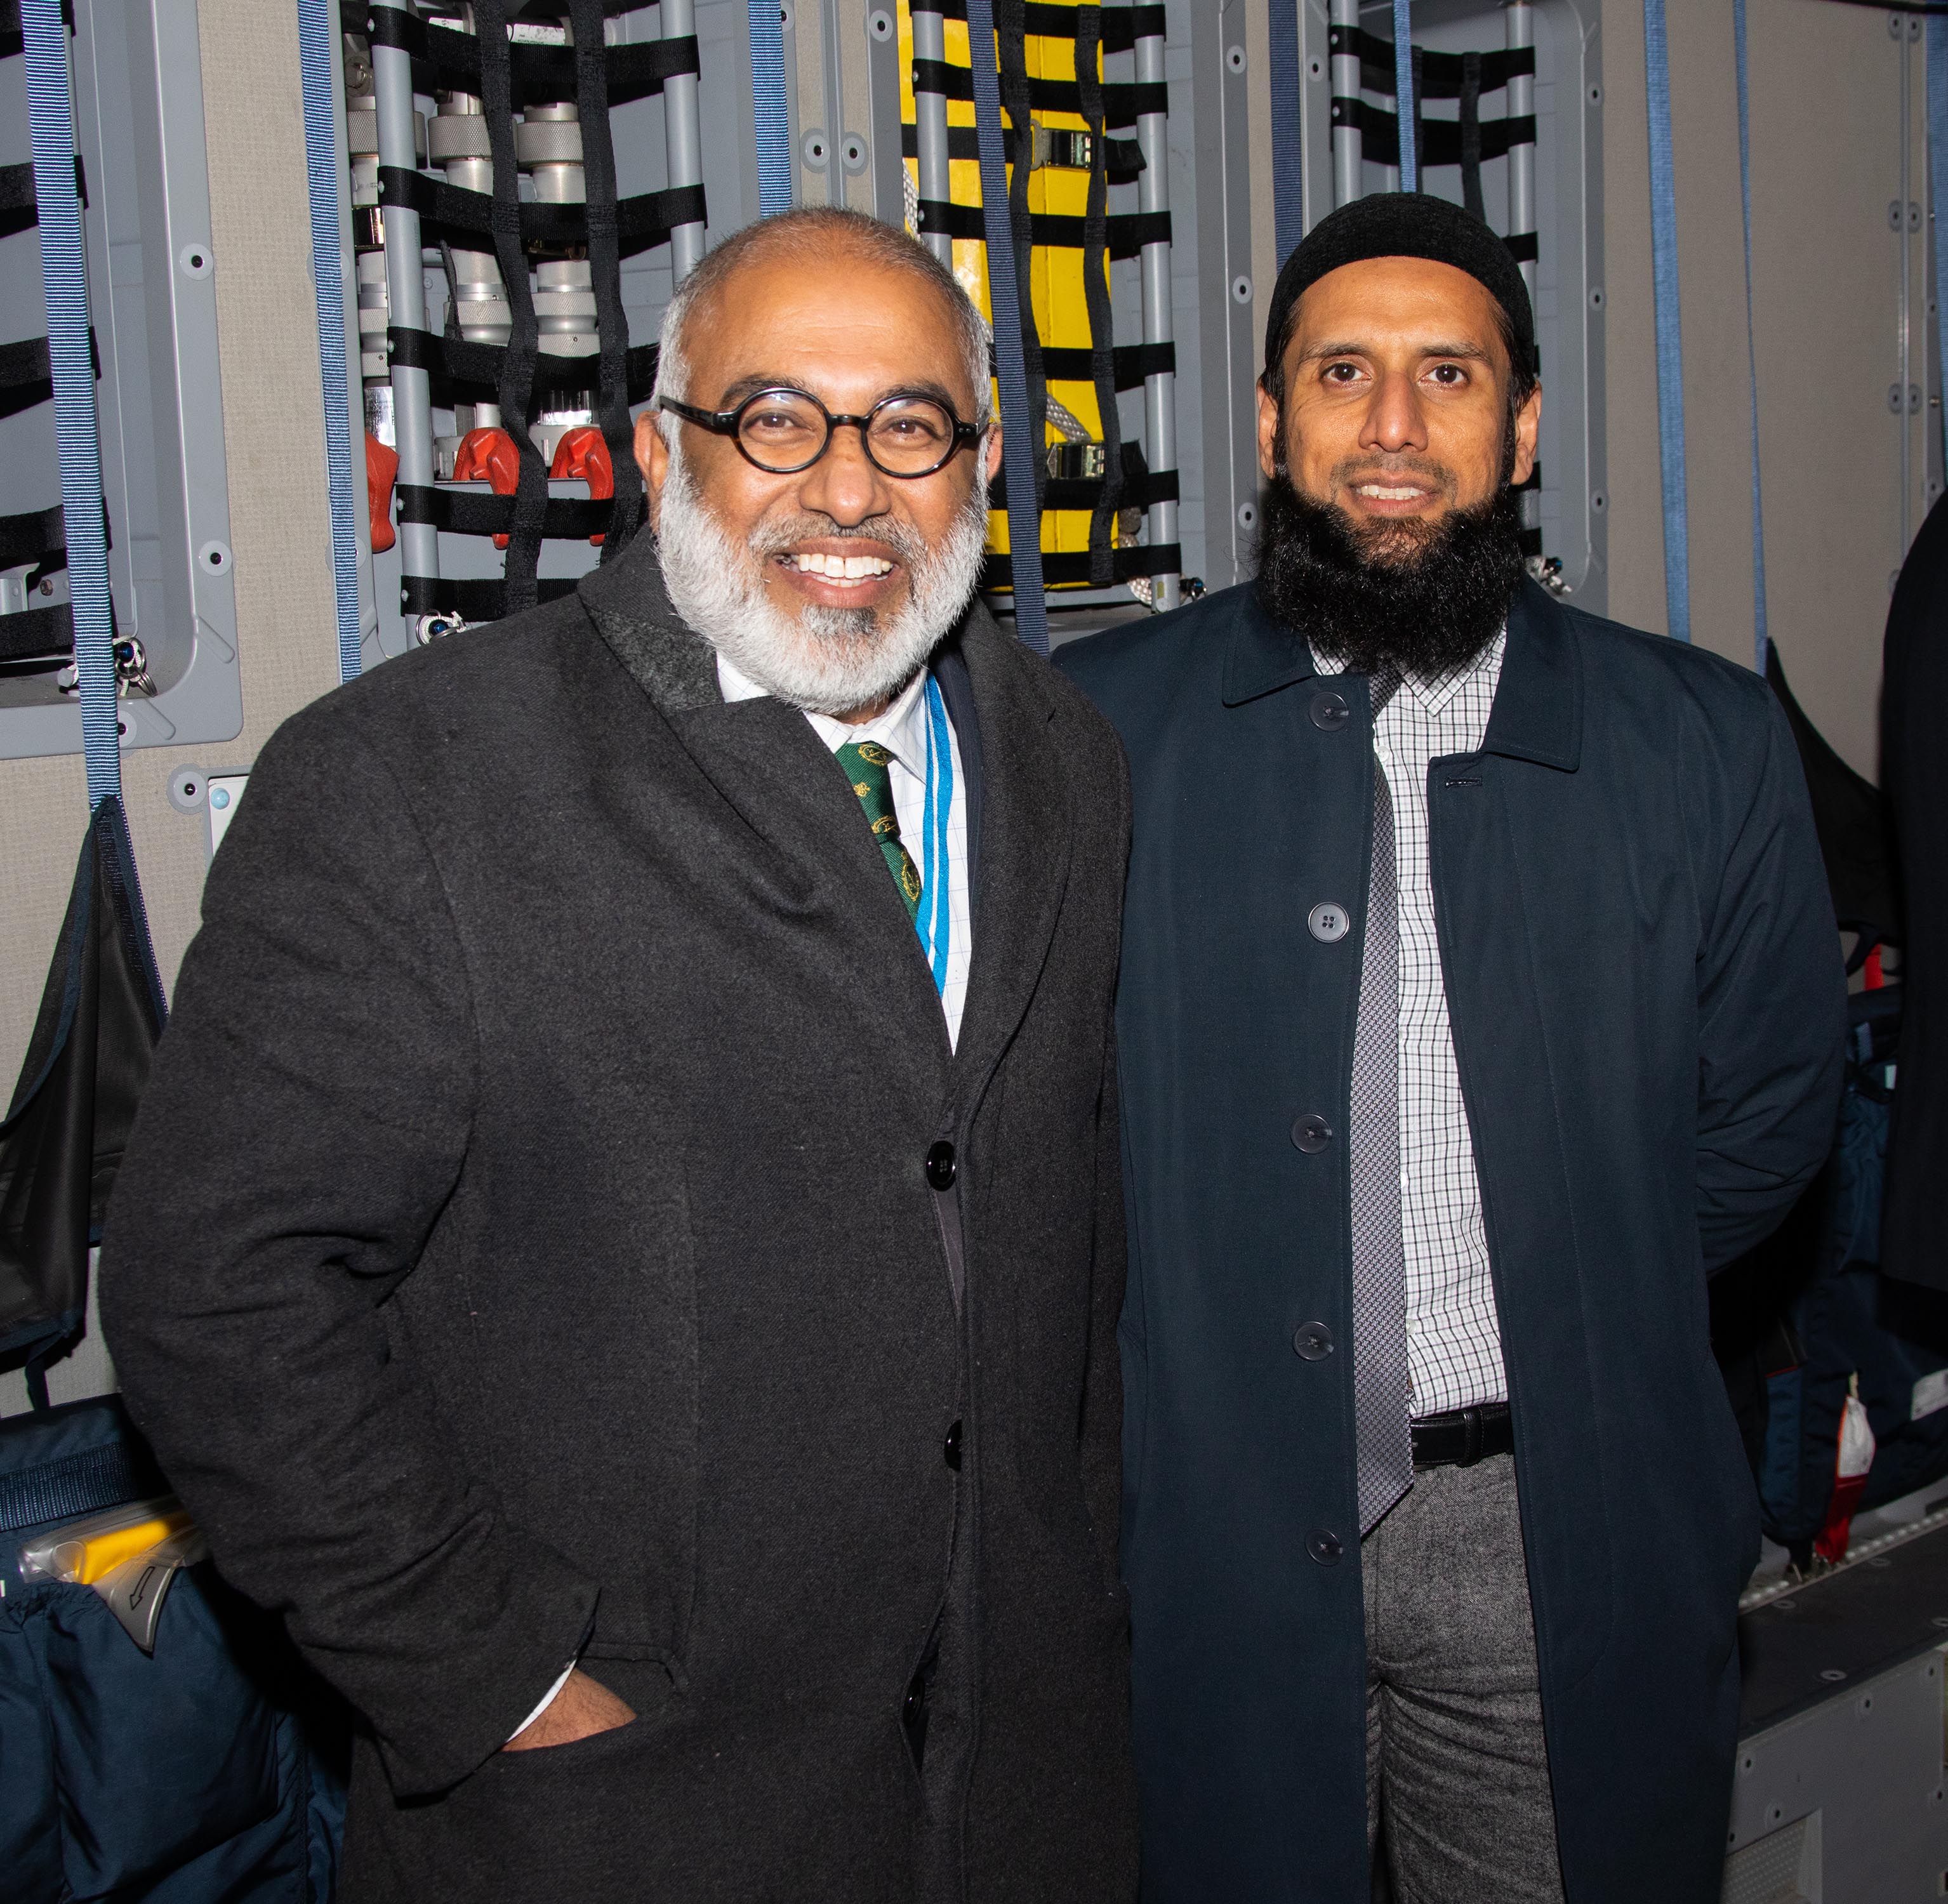 RAF Brize Norton Builds Relationships with Leaders from Muslim Communities